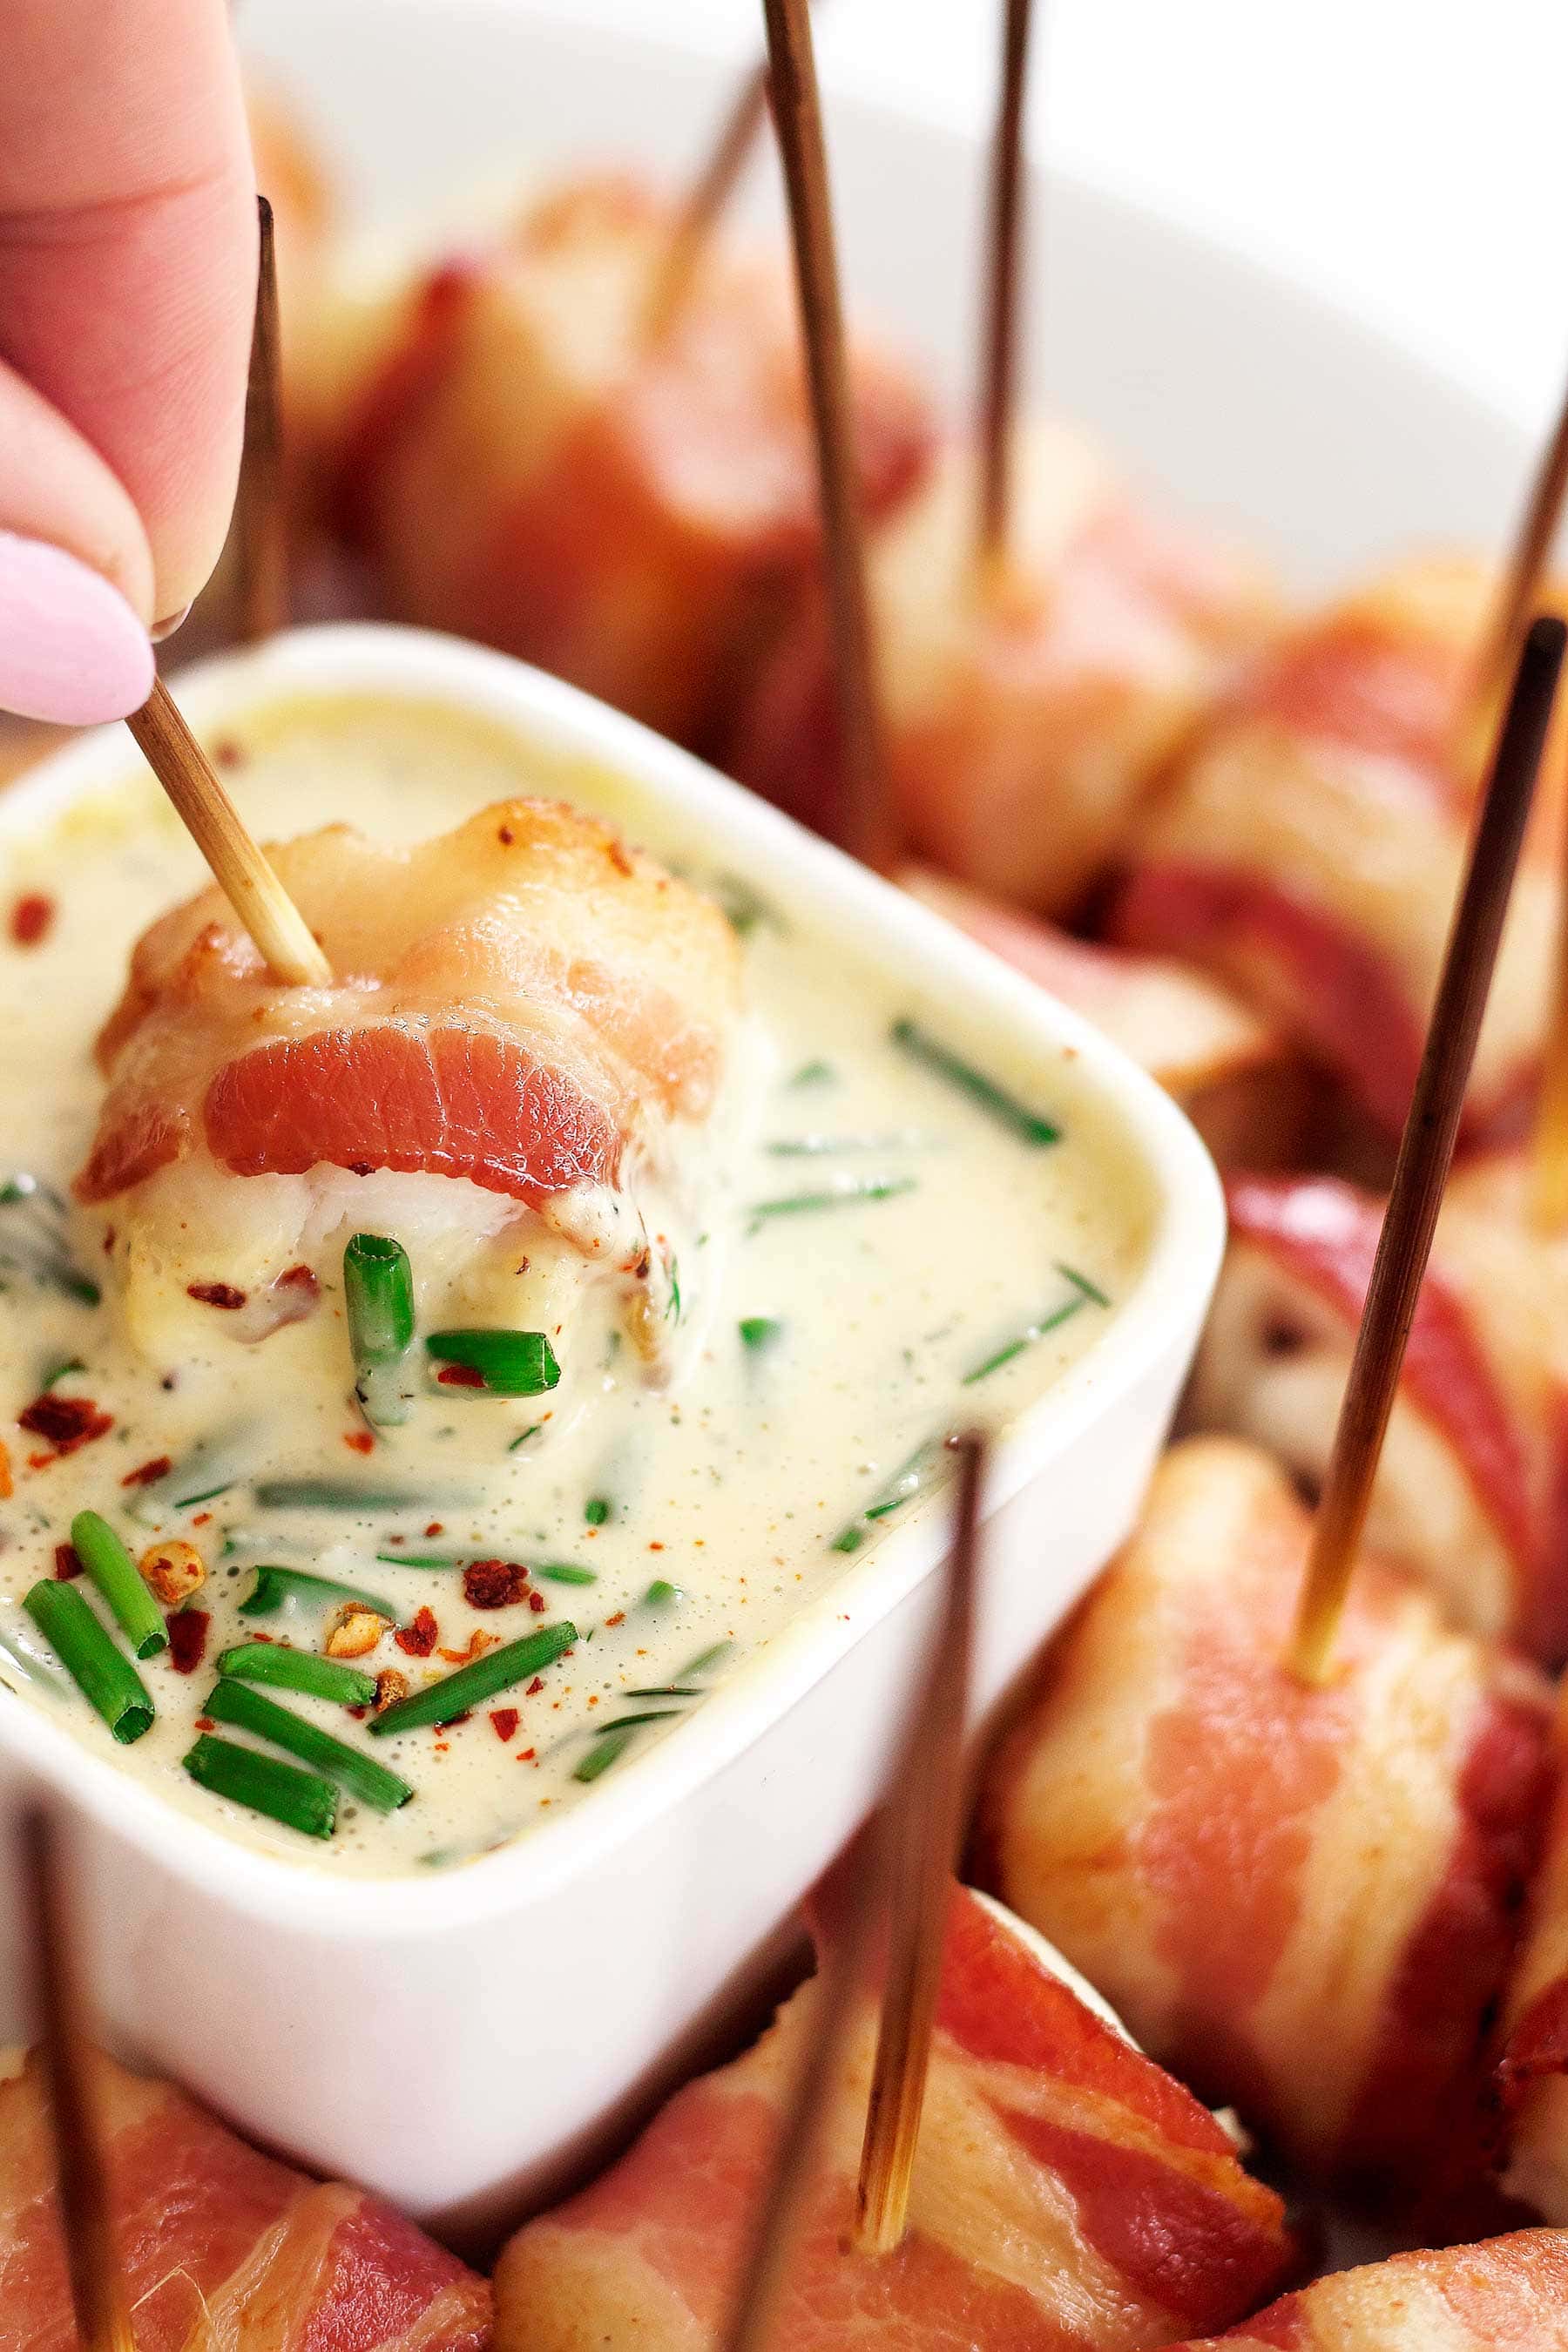 Delicious and party-ready in 25 mins! Game day reimagined. These bacon-wrapped grouper bites are just what you need to make your next party or game day feel special and taste amazing! This simple appetizer is #Whole30, #paleo, #glutenfree, #dairyfree, #lowcarb, #keto, and so easy to make!! It works with almost any fish or even shrimp or chicken! #paleoappetizer #whole30appetizer #gamedayrecipes #whole30recipes #healthyeating #bacon #grouper #glutenfreeappetizer #Whole30gameday #paleogameday #healthypartyfood #spicyranch #paleoranch #whole30ranch